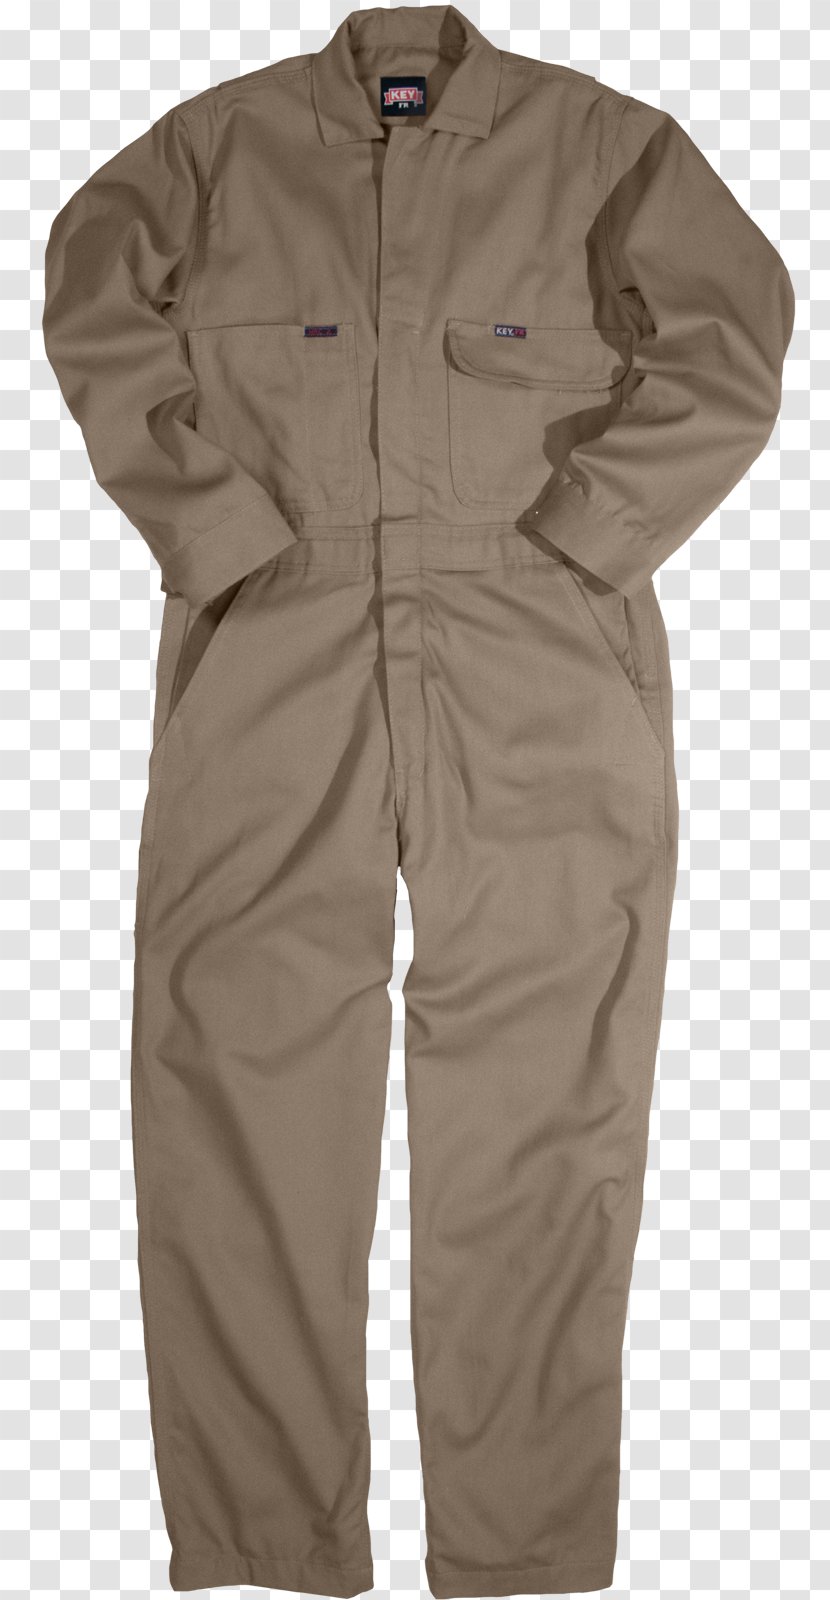 Overall Clothing Boilersuit Outerwear Denim - Overalls Transparent PNG